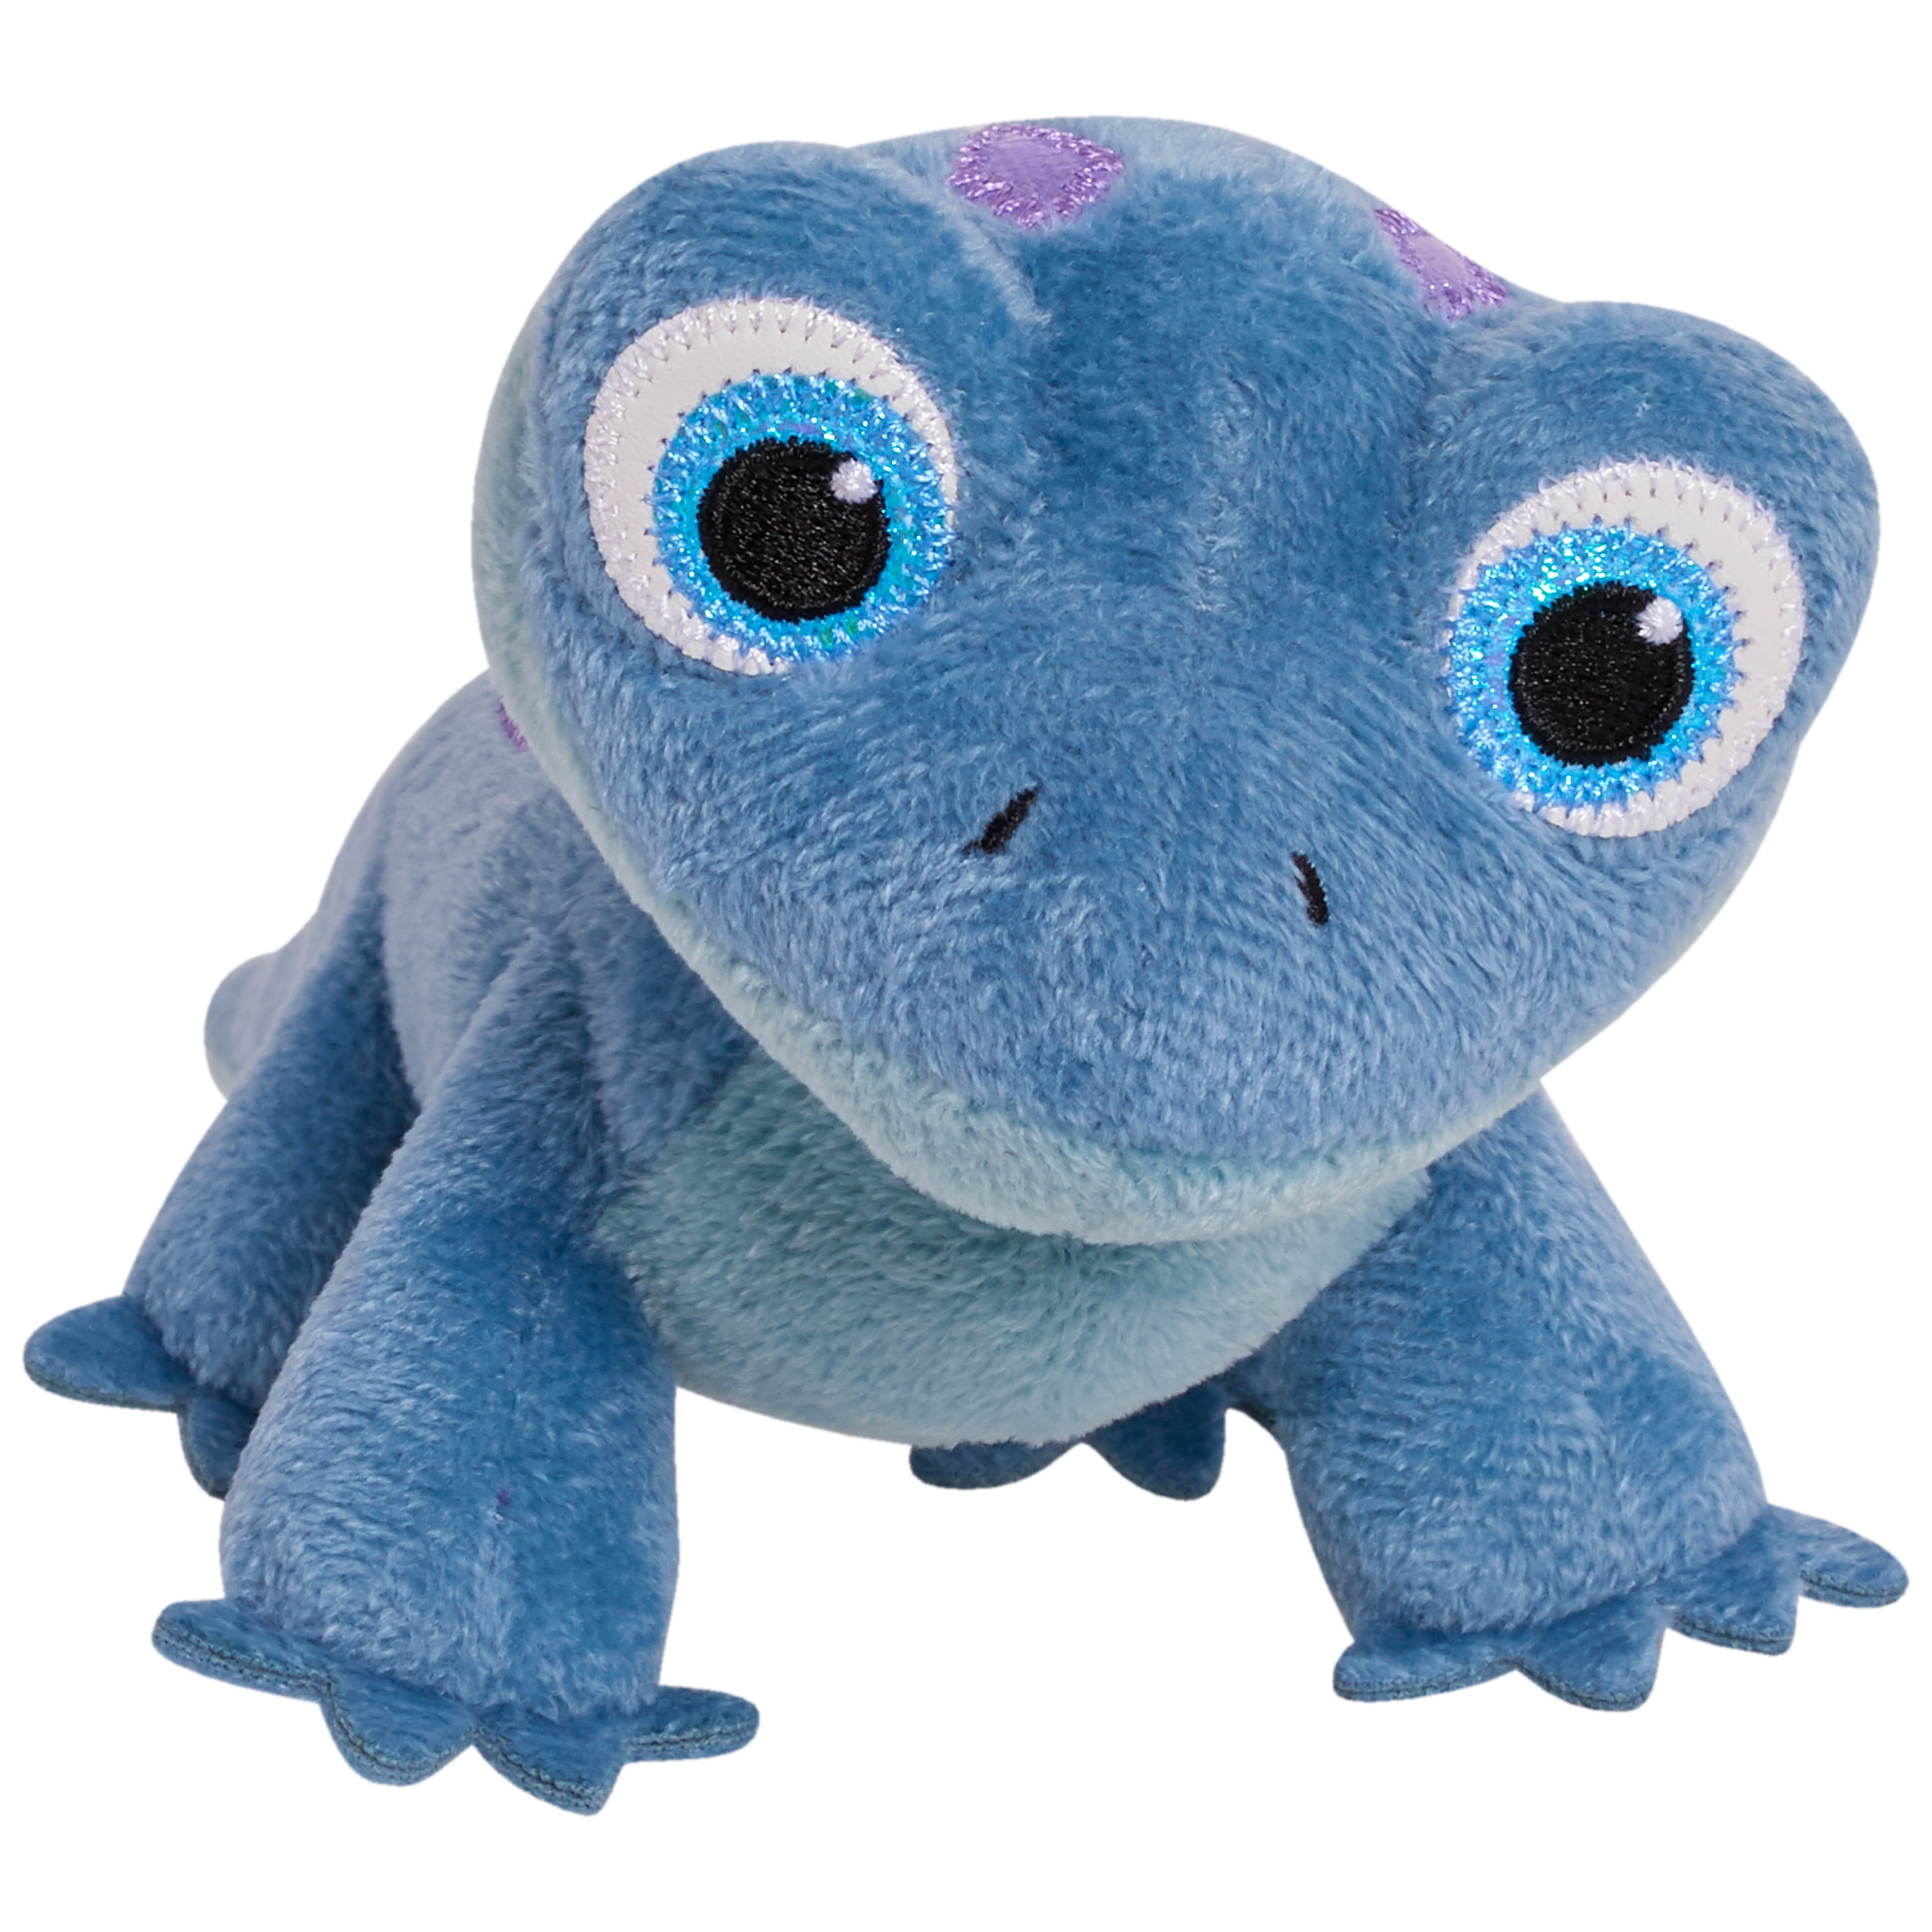 Brand New! Disney’s Frozen 2 9-Inch Small Plush Bruni the Fire Spirit Ages 3 